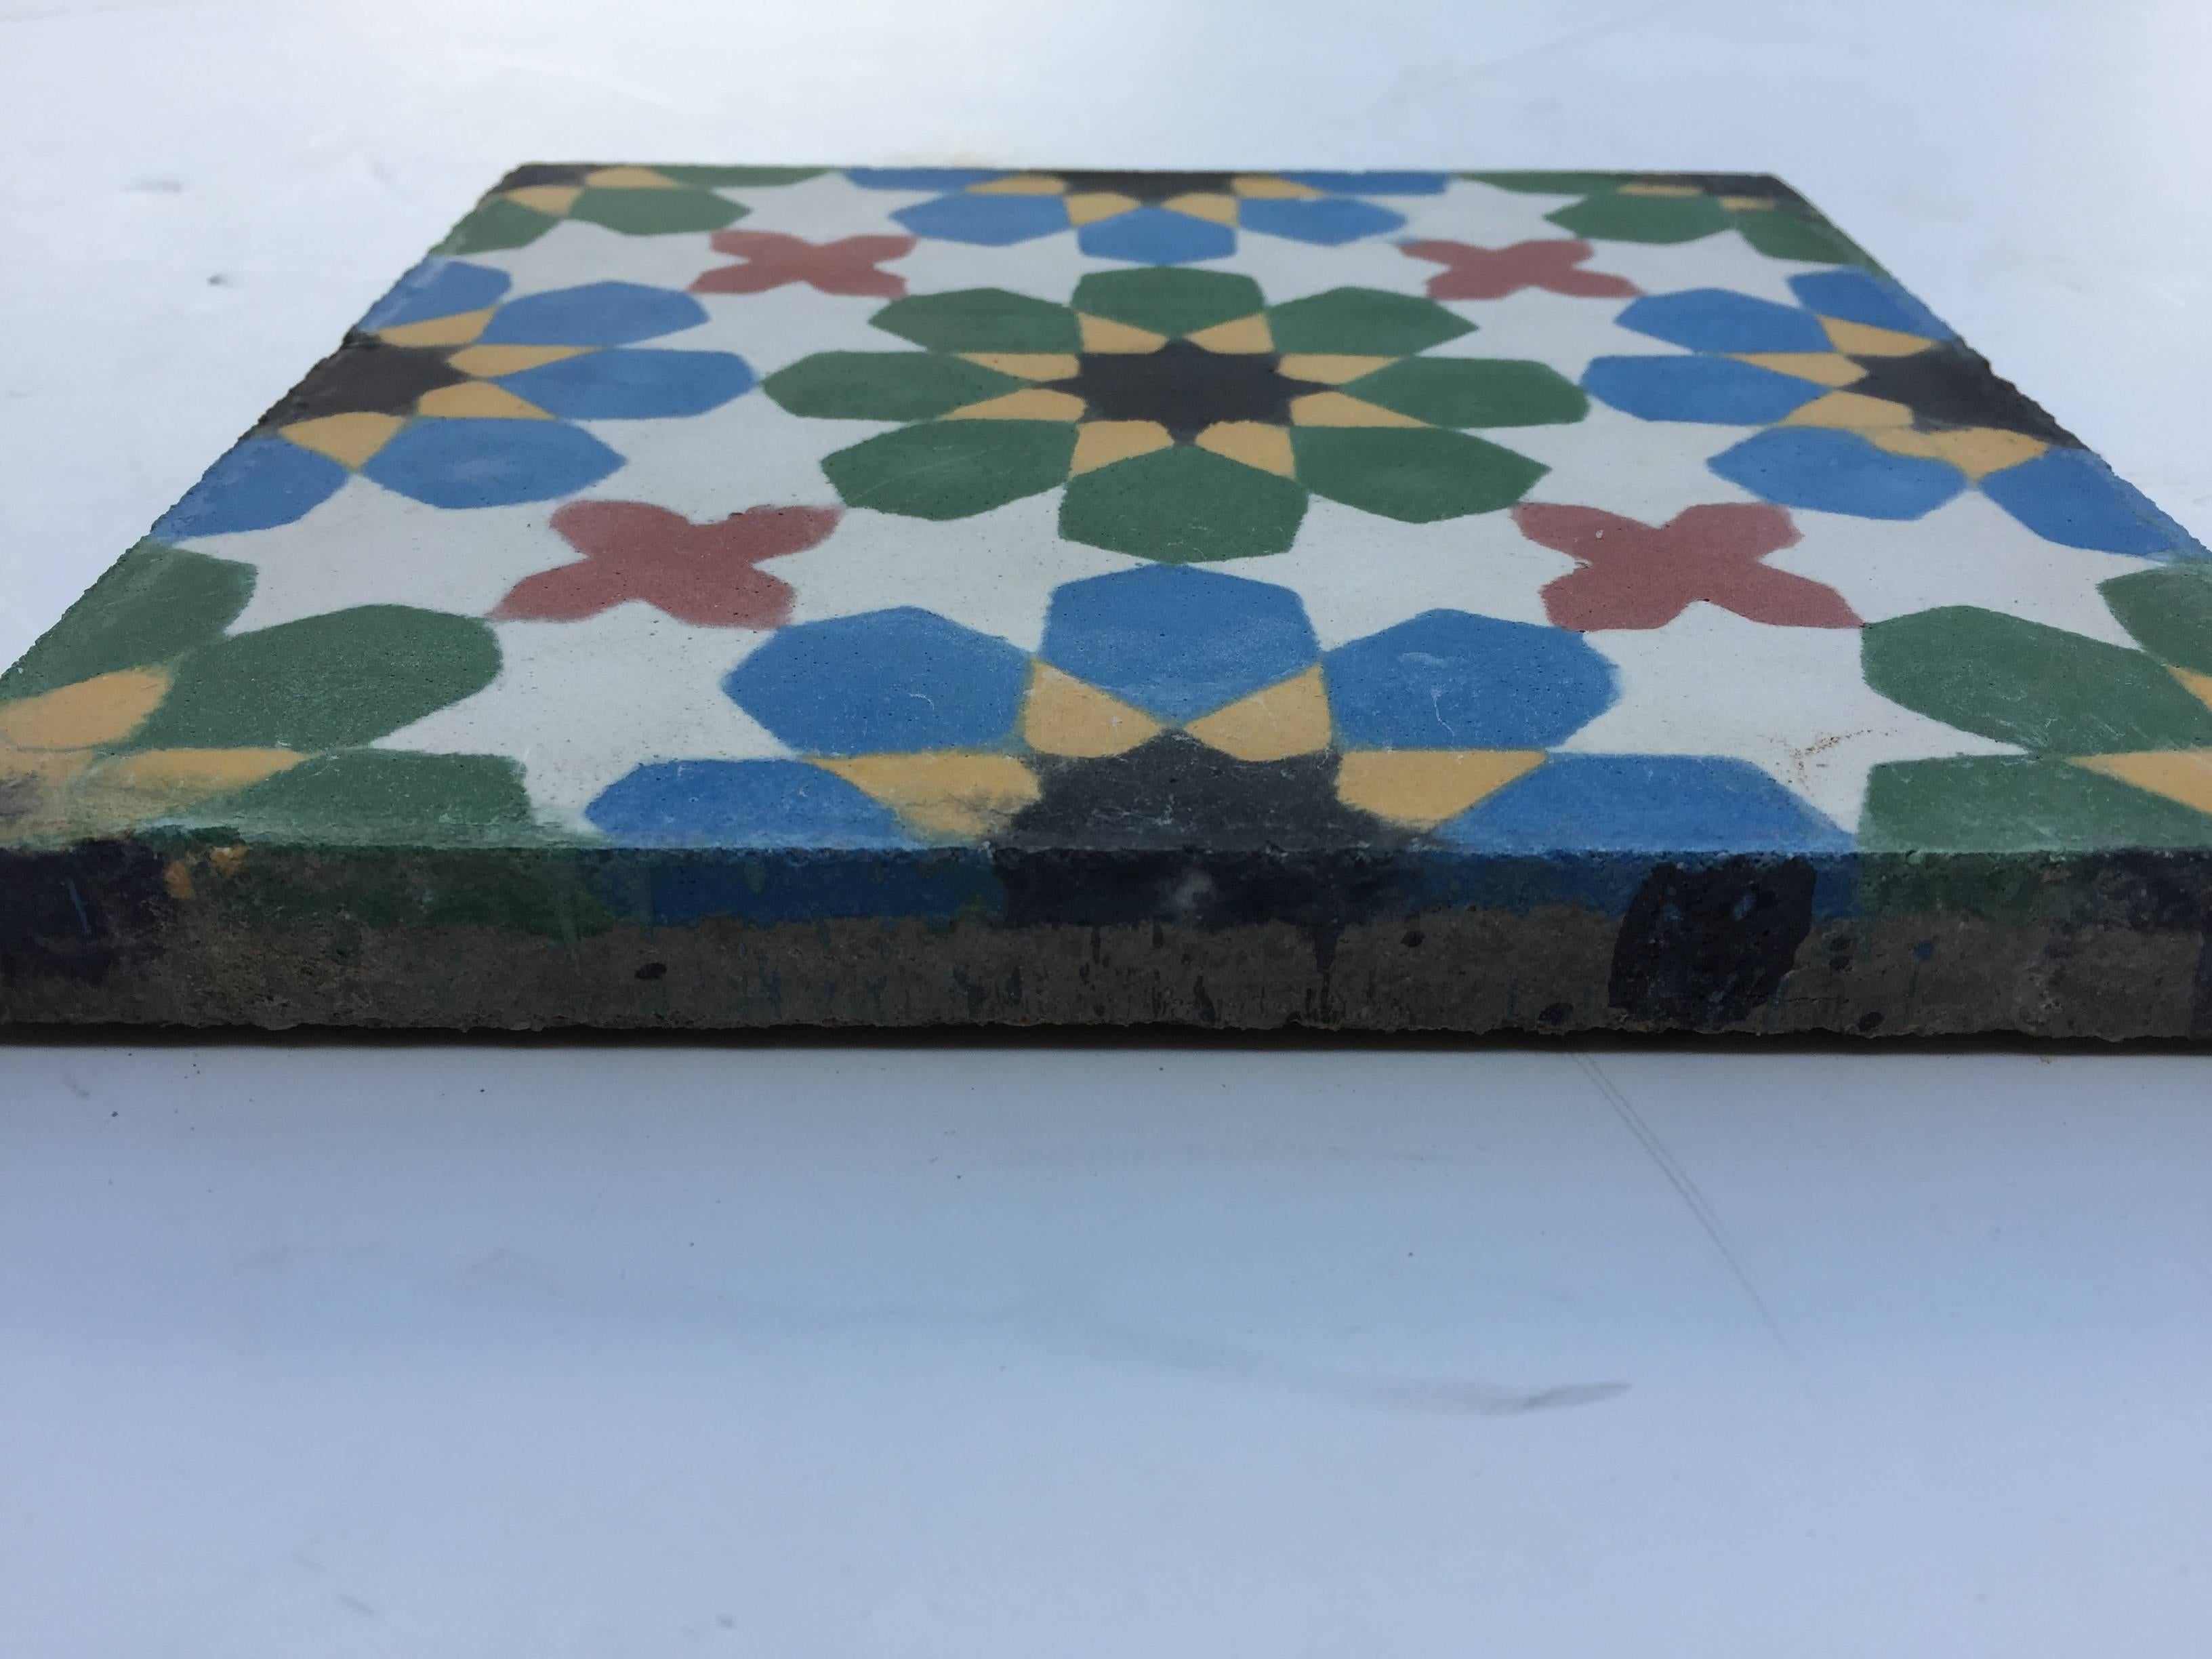 Moroccan handcrafted and hand-painted cement tile with traditional Fez Moorish Design.
Moroccan Hand-Painted Cement Tile with Traditional Fez Design
These are authentic Moroccan encaustic tiles hand made by artisans in Fez Morocco. This is the